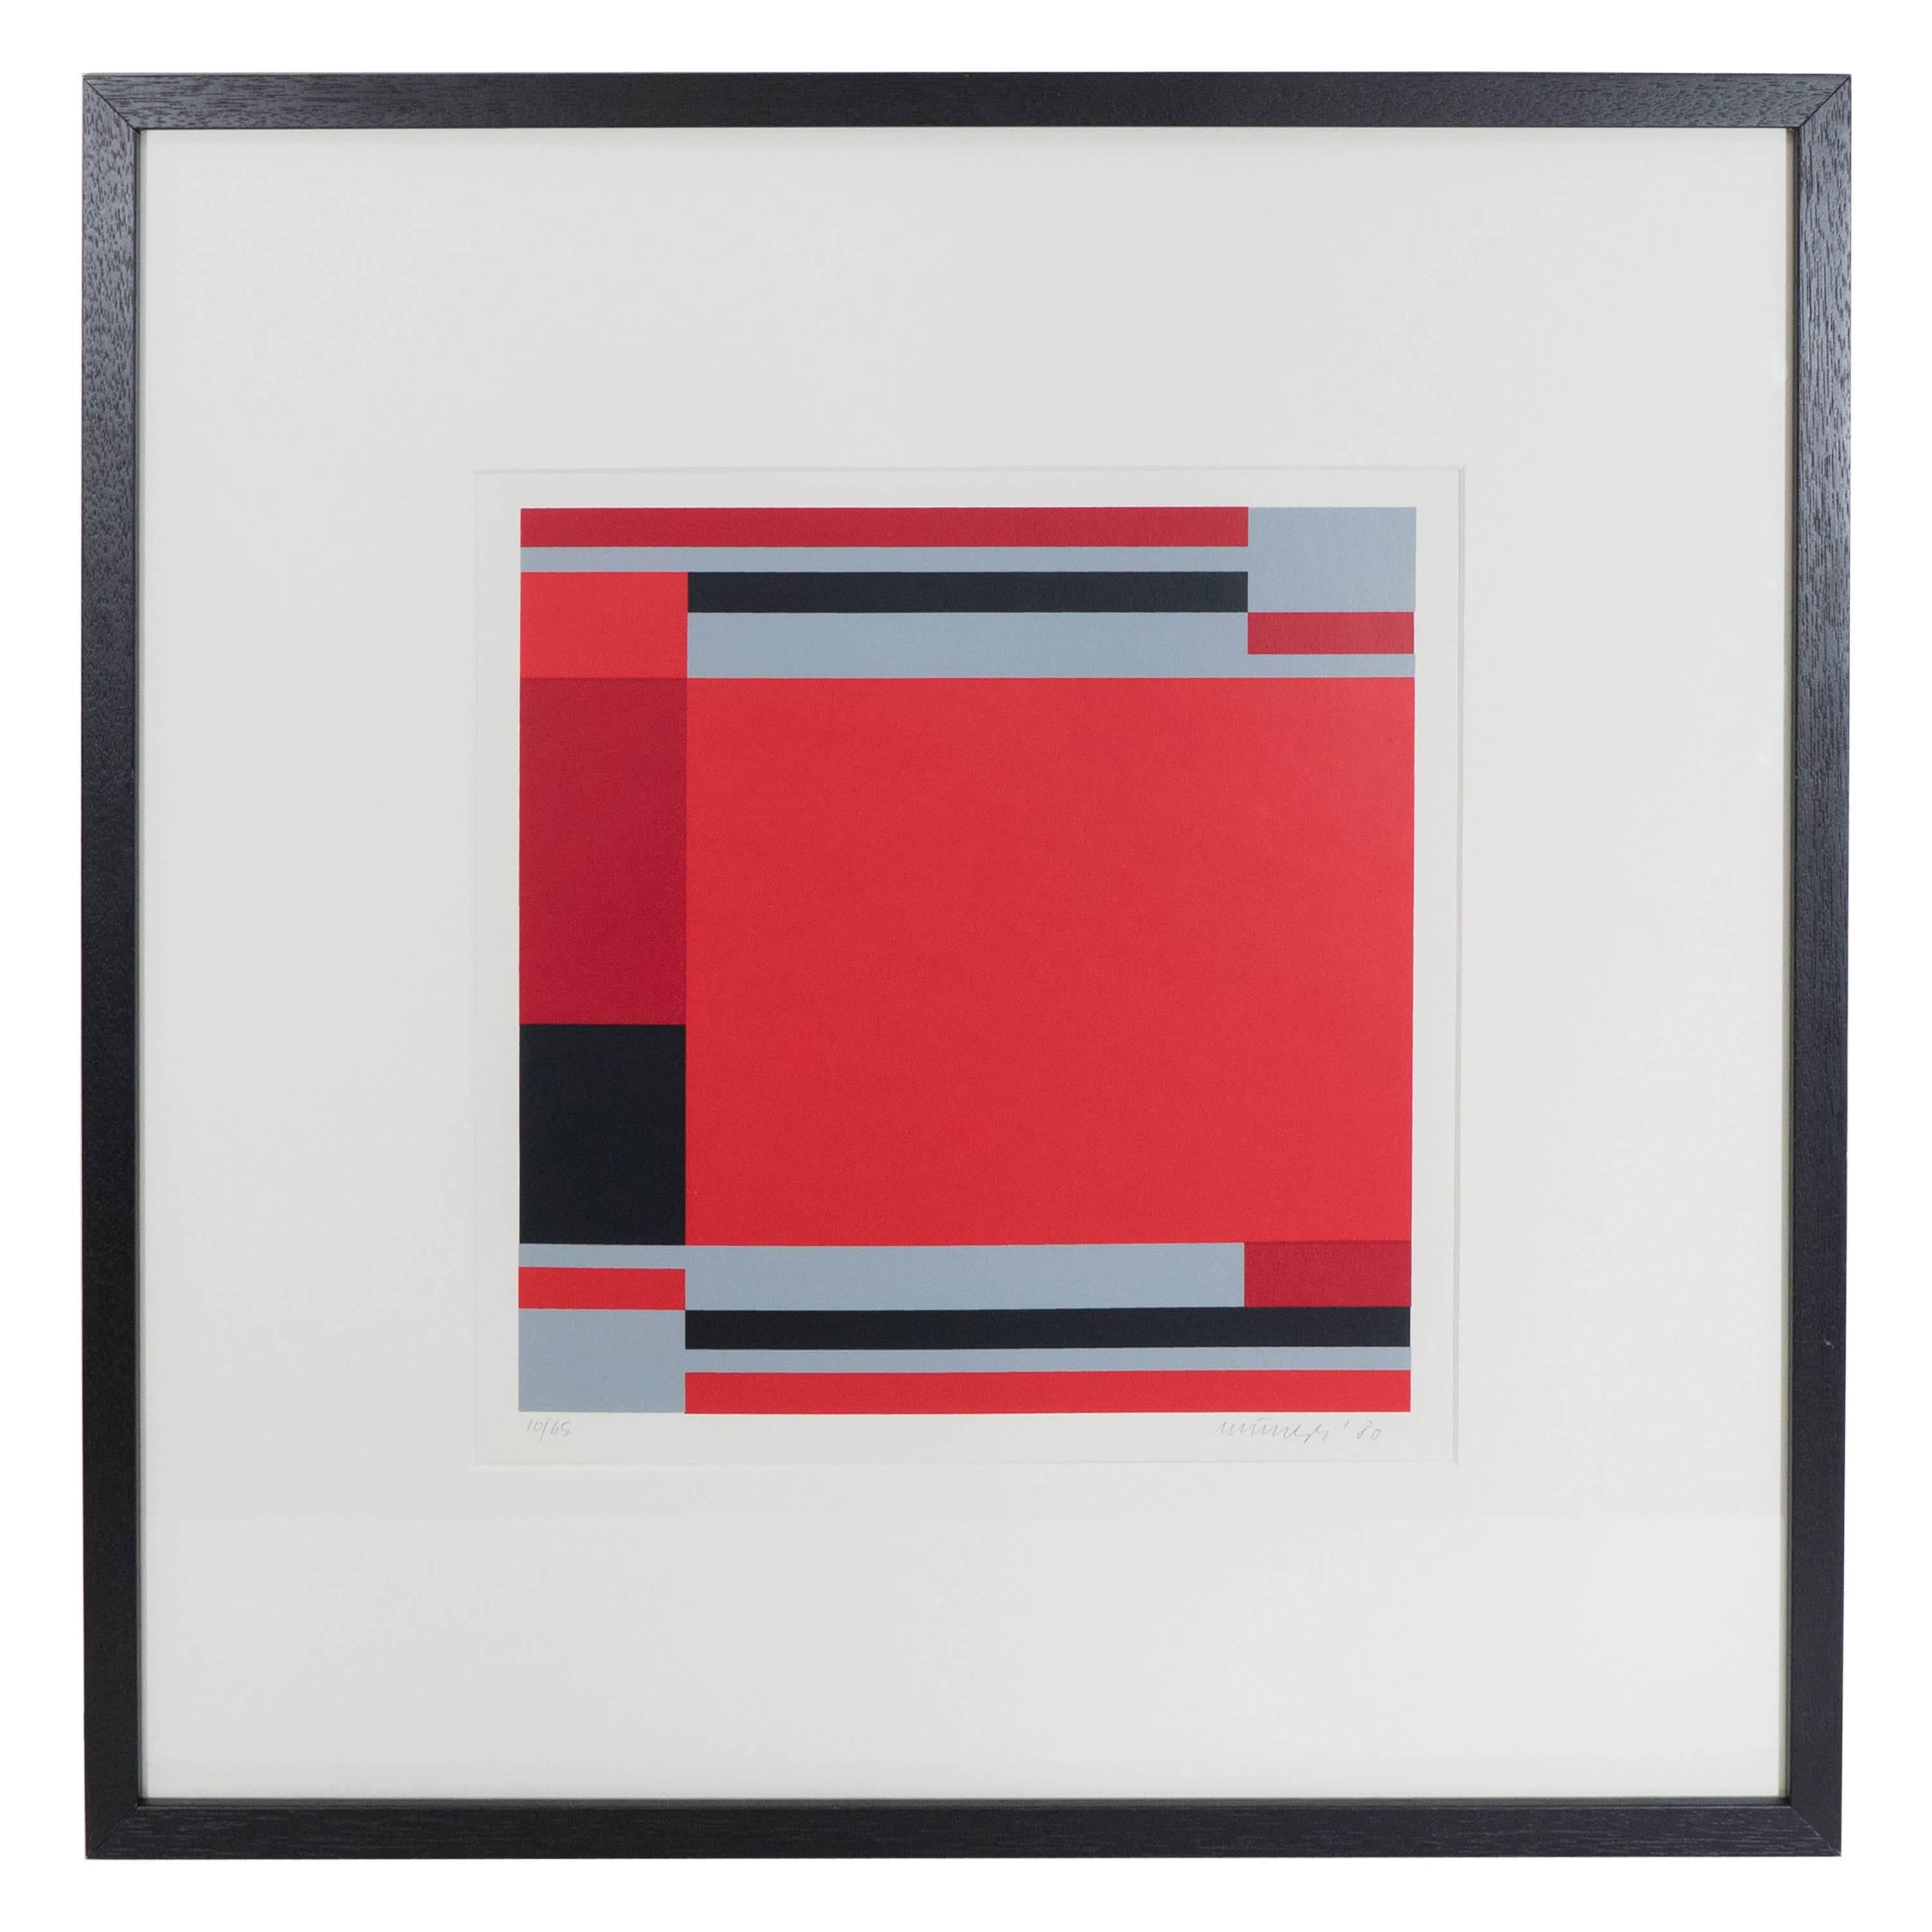 Jo Niemeyer, Geometric Composition in Red, Grey & Black, Signed & Dated